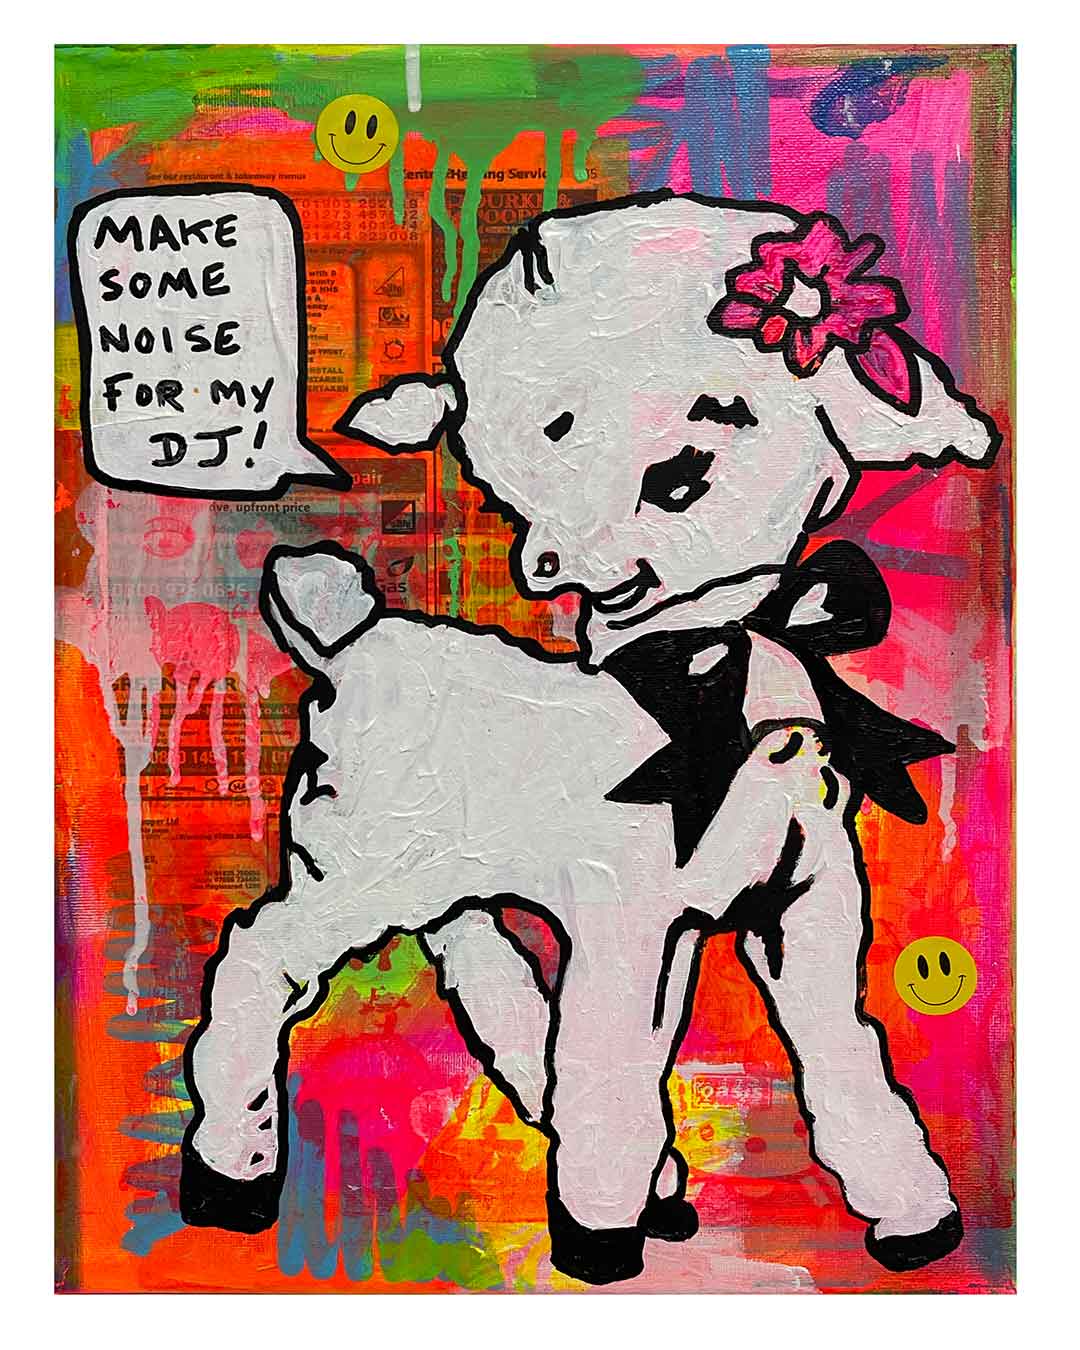 Deejay Painting by Barrie J Davies 2024, Mixed media on Canvas, 21 cm x 29 cm, Unframed and ready to hang.